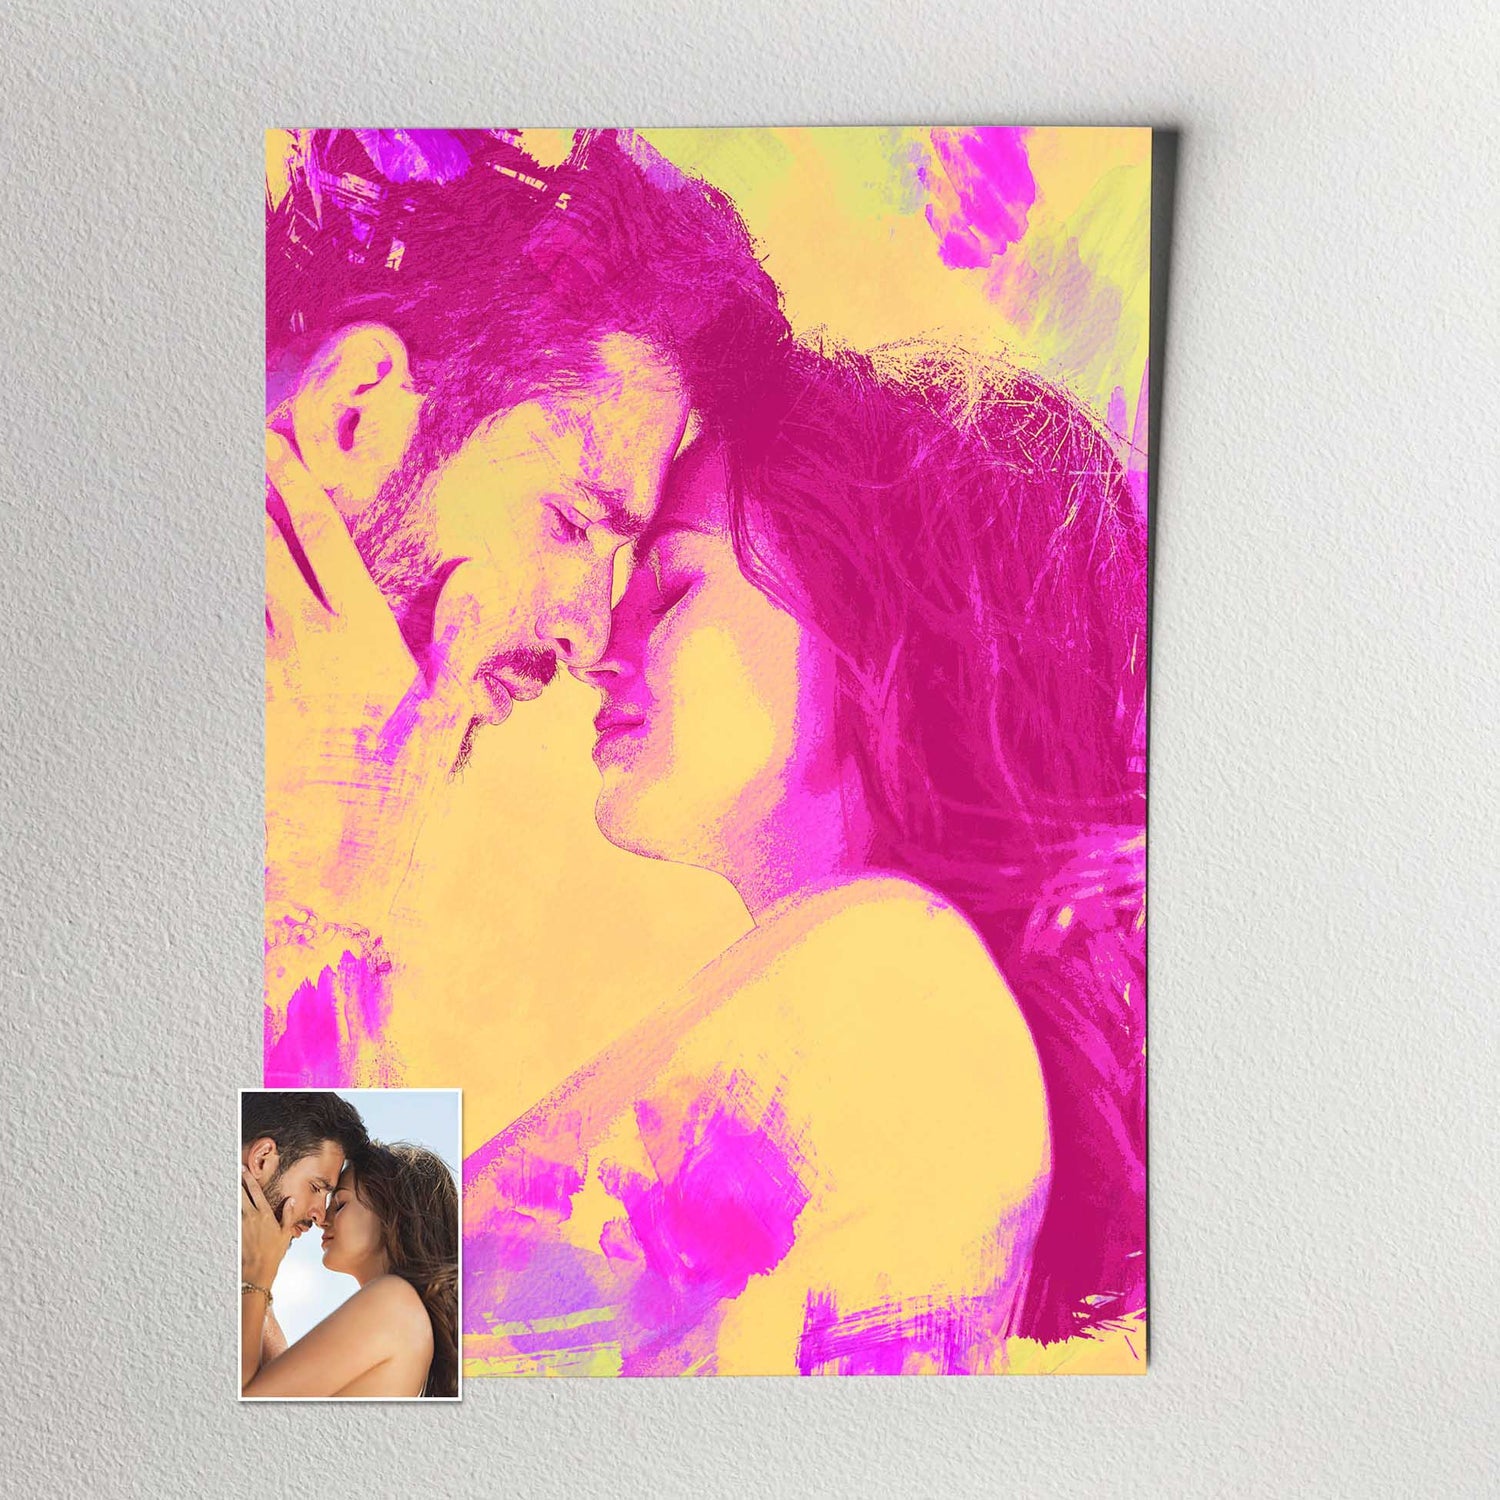 The versatility of our digital art prints allows you to choose from various styles such as oil painting, abstract art, or watercolour aquarelle. Each style brings a unique and captivating visual appeal to your home decor